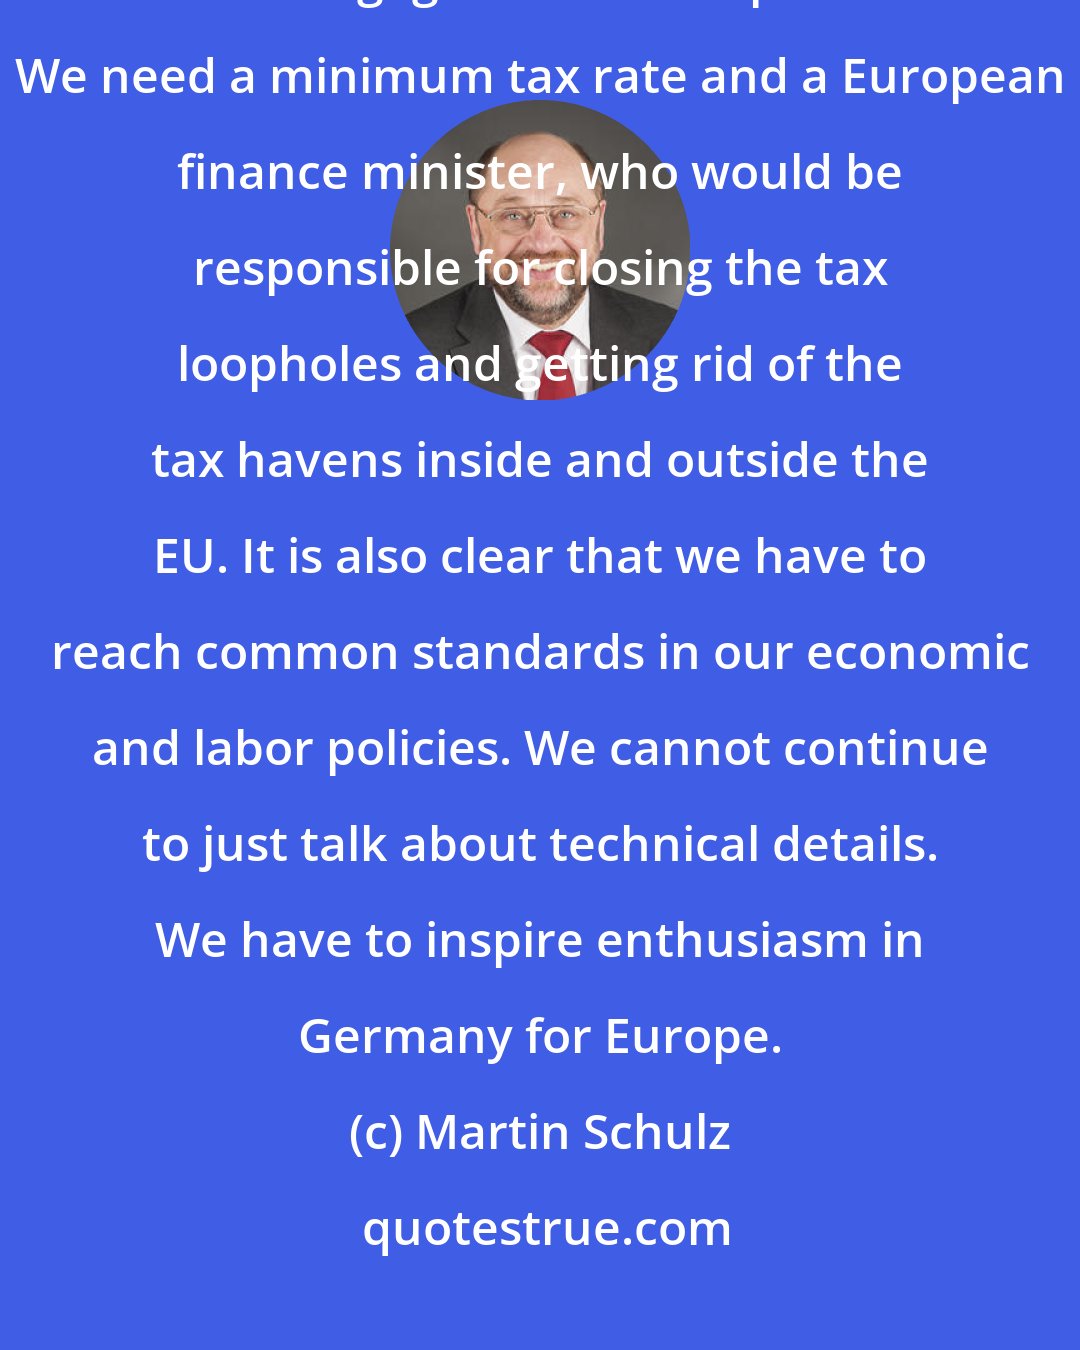 Martin Schulz: I want to end tax dumping. States that have a common currency should not be engaged in tax competition. We need a minimum tax rate and a European finance minister, who would be responsible for closing the tax loopholes and getting rid of the tax havens inside and outside the EU. It is also clear that we have to reach common standards in our economic and labor policies. We cannot continue to just talk about technical details. We have to inspire enthusiasm in Germany for Europe.